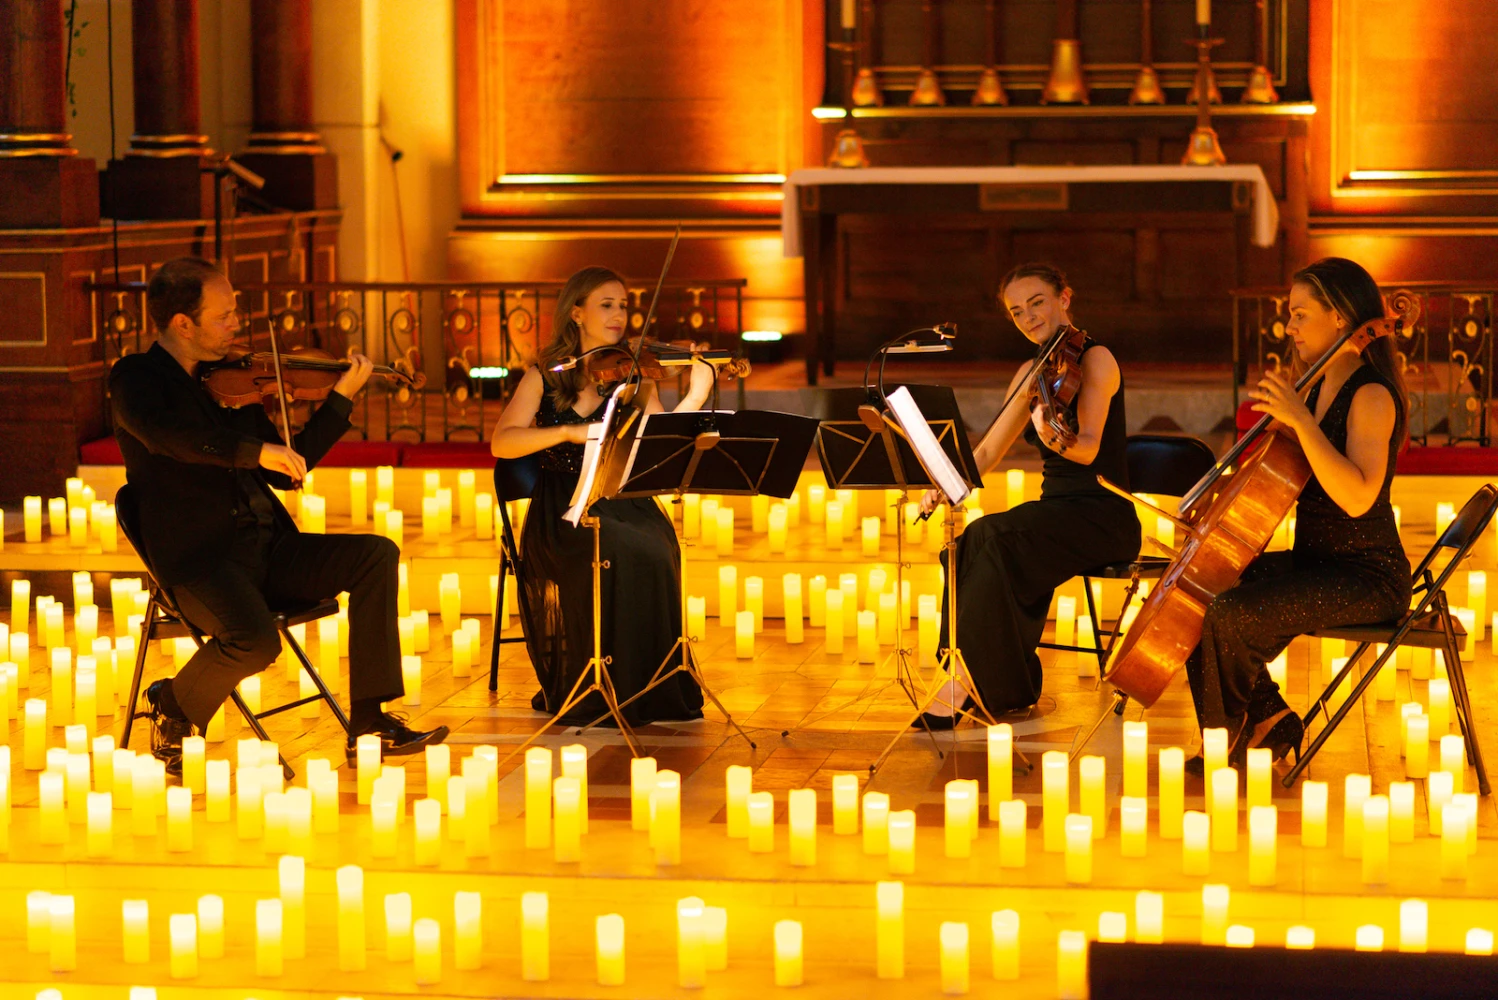 Christmas by Candlelight - St Giles-in-the-Fields: What to expect - 2